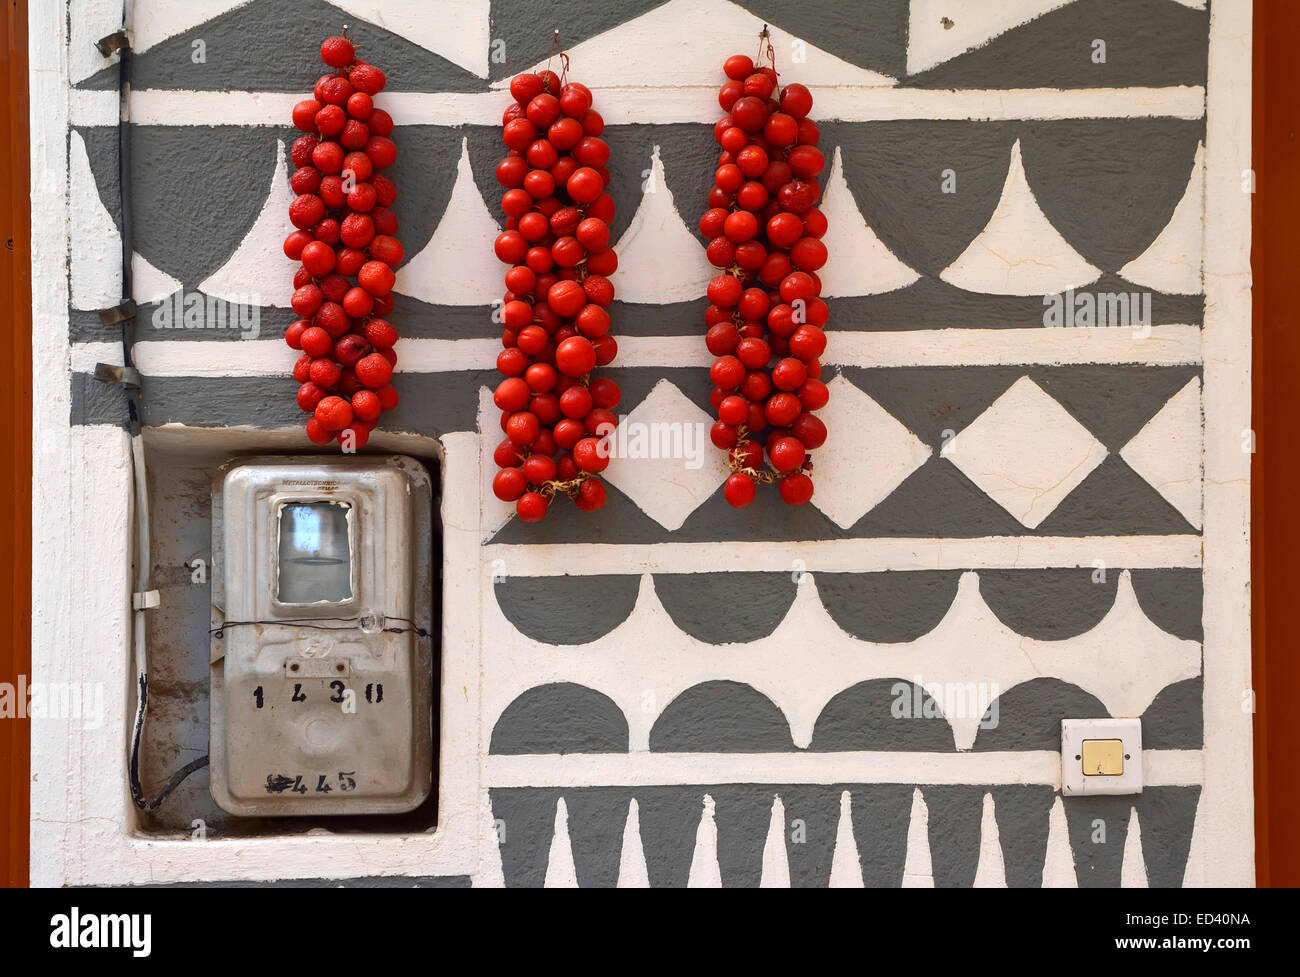 Sun-drying tomatoes hang on a wall of sgraffiti pattern, with a domestic power meter adjacent. Stock Photo